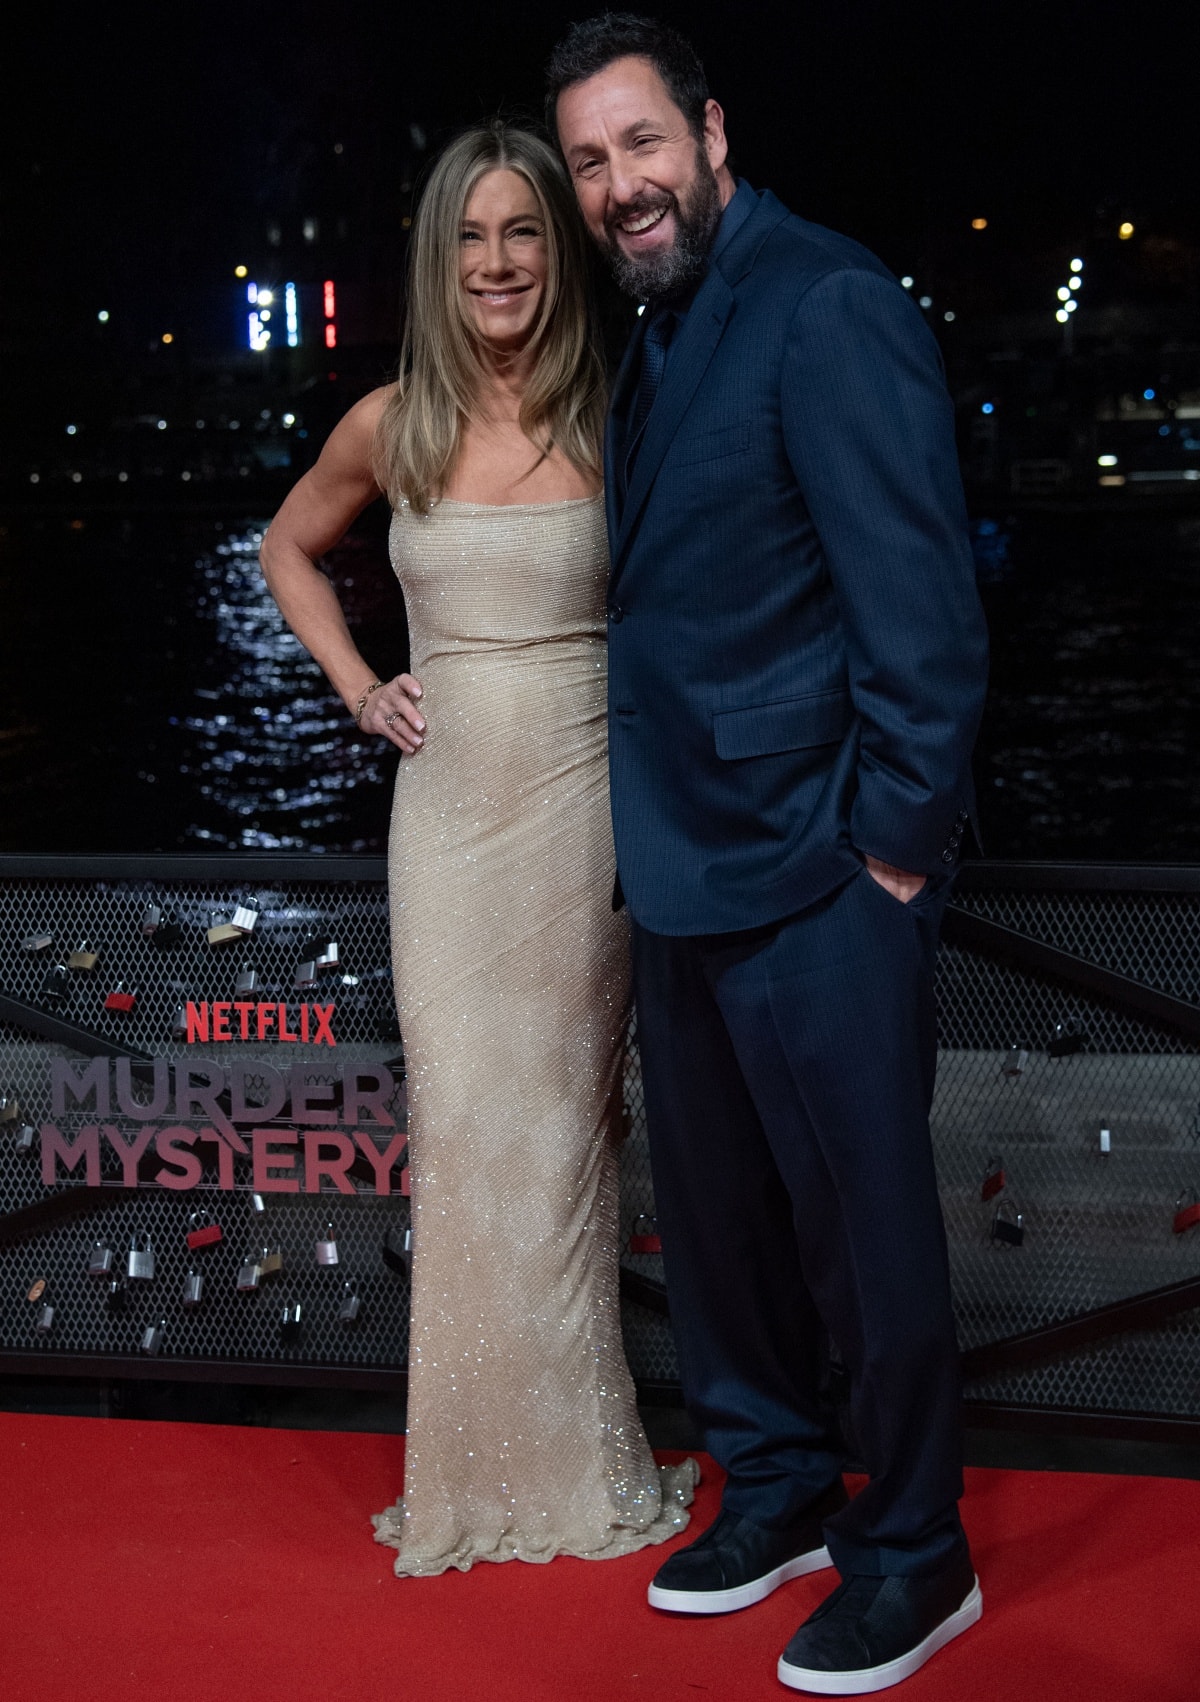 Adam Sandler with co-star Jennifer Aniston at the premiere of Murder Mystery 2 in Paris